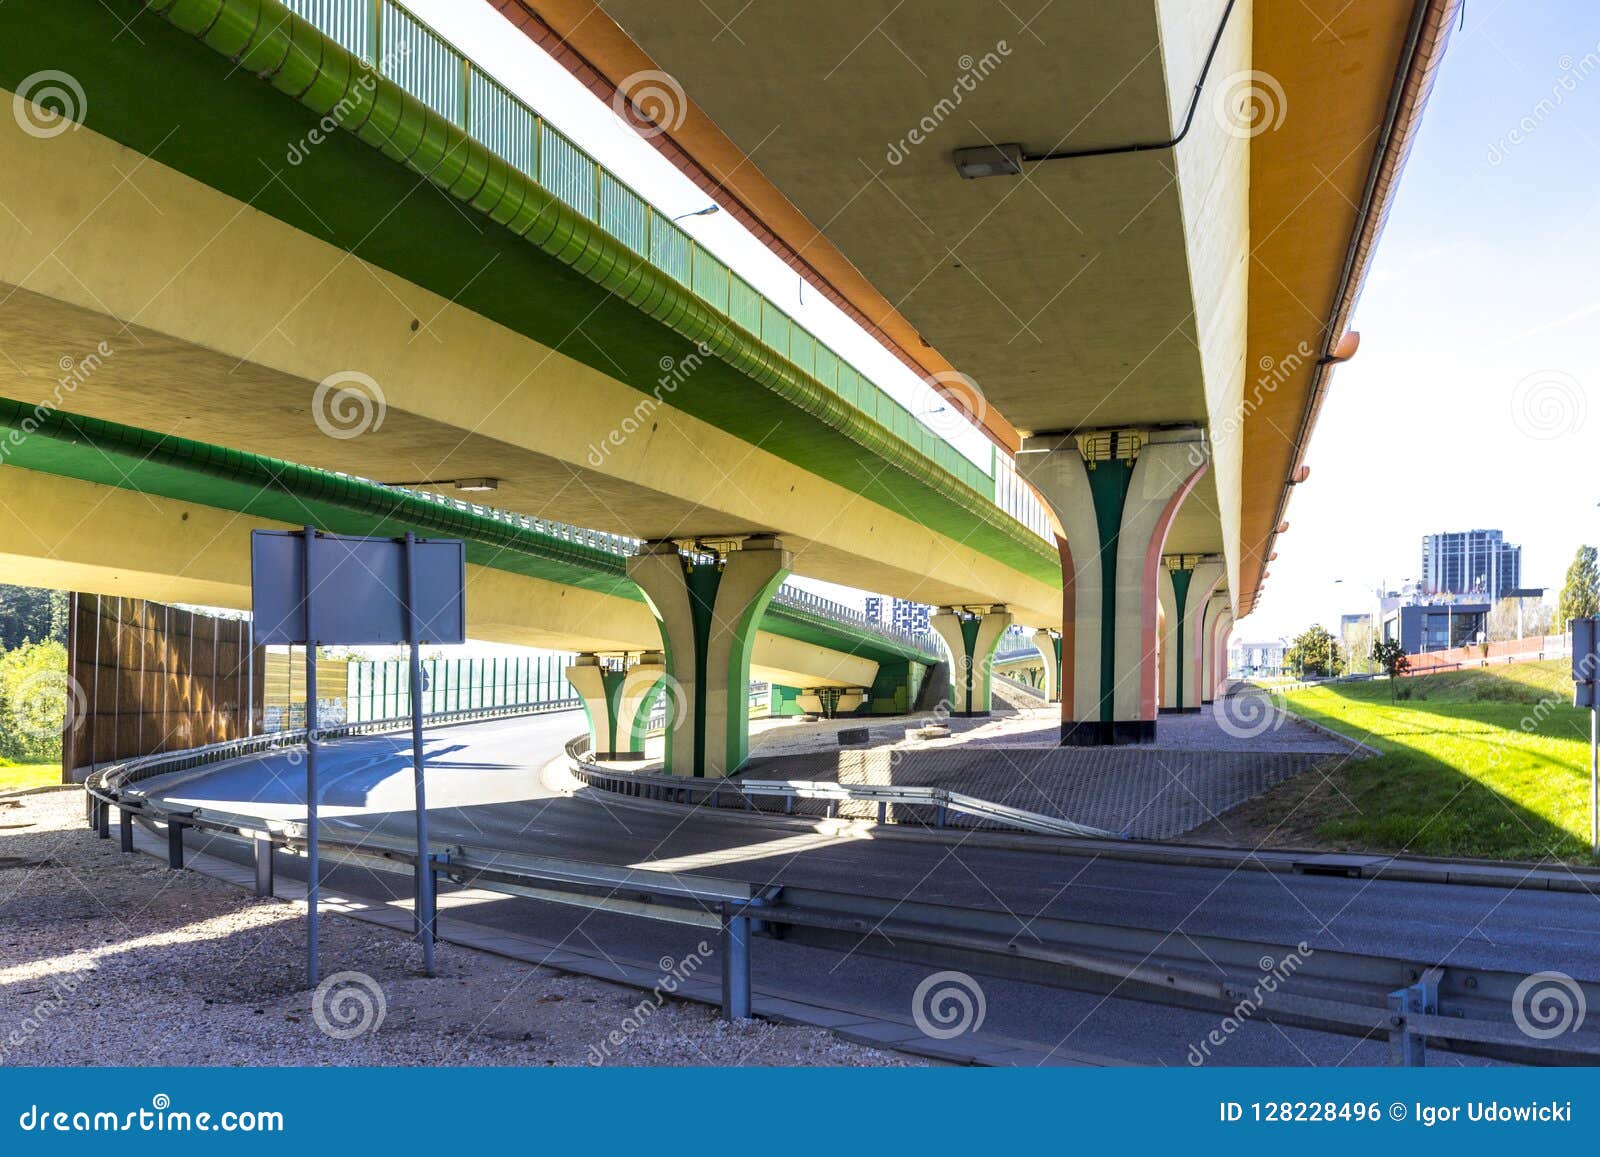 Highway, Overpasses and Colored Concrete Columns. Stock Photo - Image ...